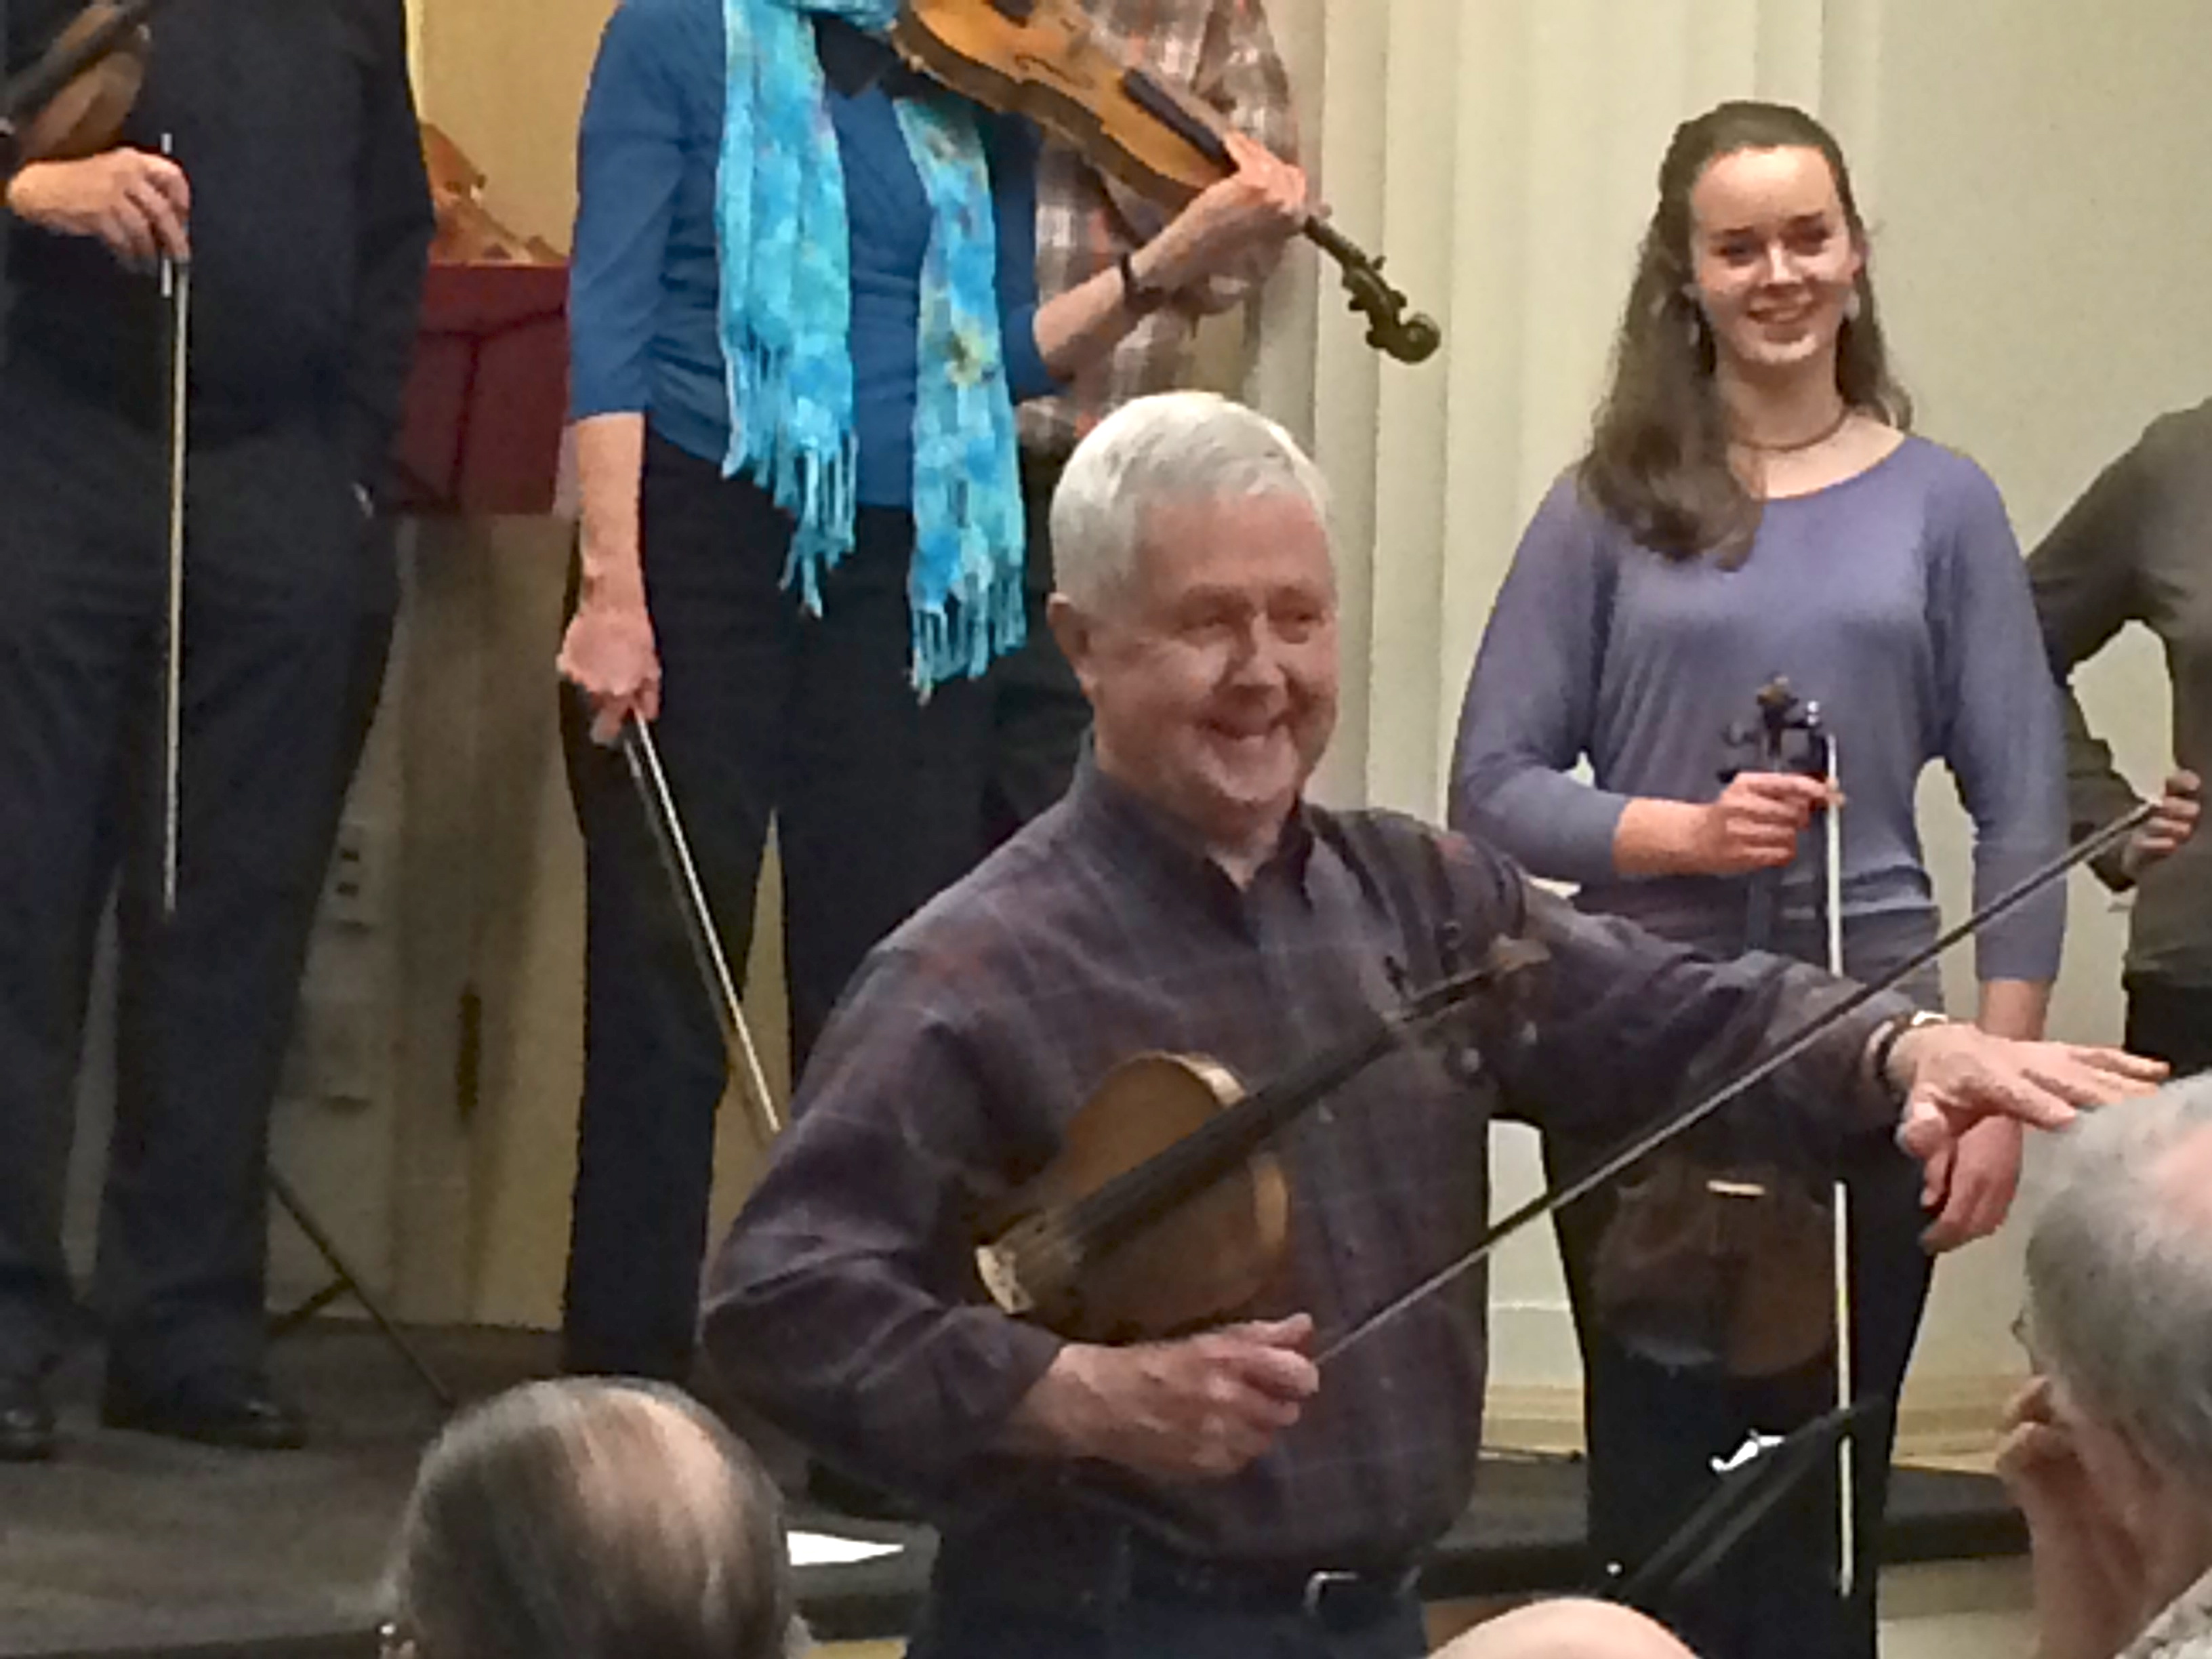 Calum MacKinnon -NW Scottish Fiddlers' music director, in addition to inspiring the group, is sure to have some great stories to share with everyone!